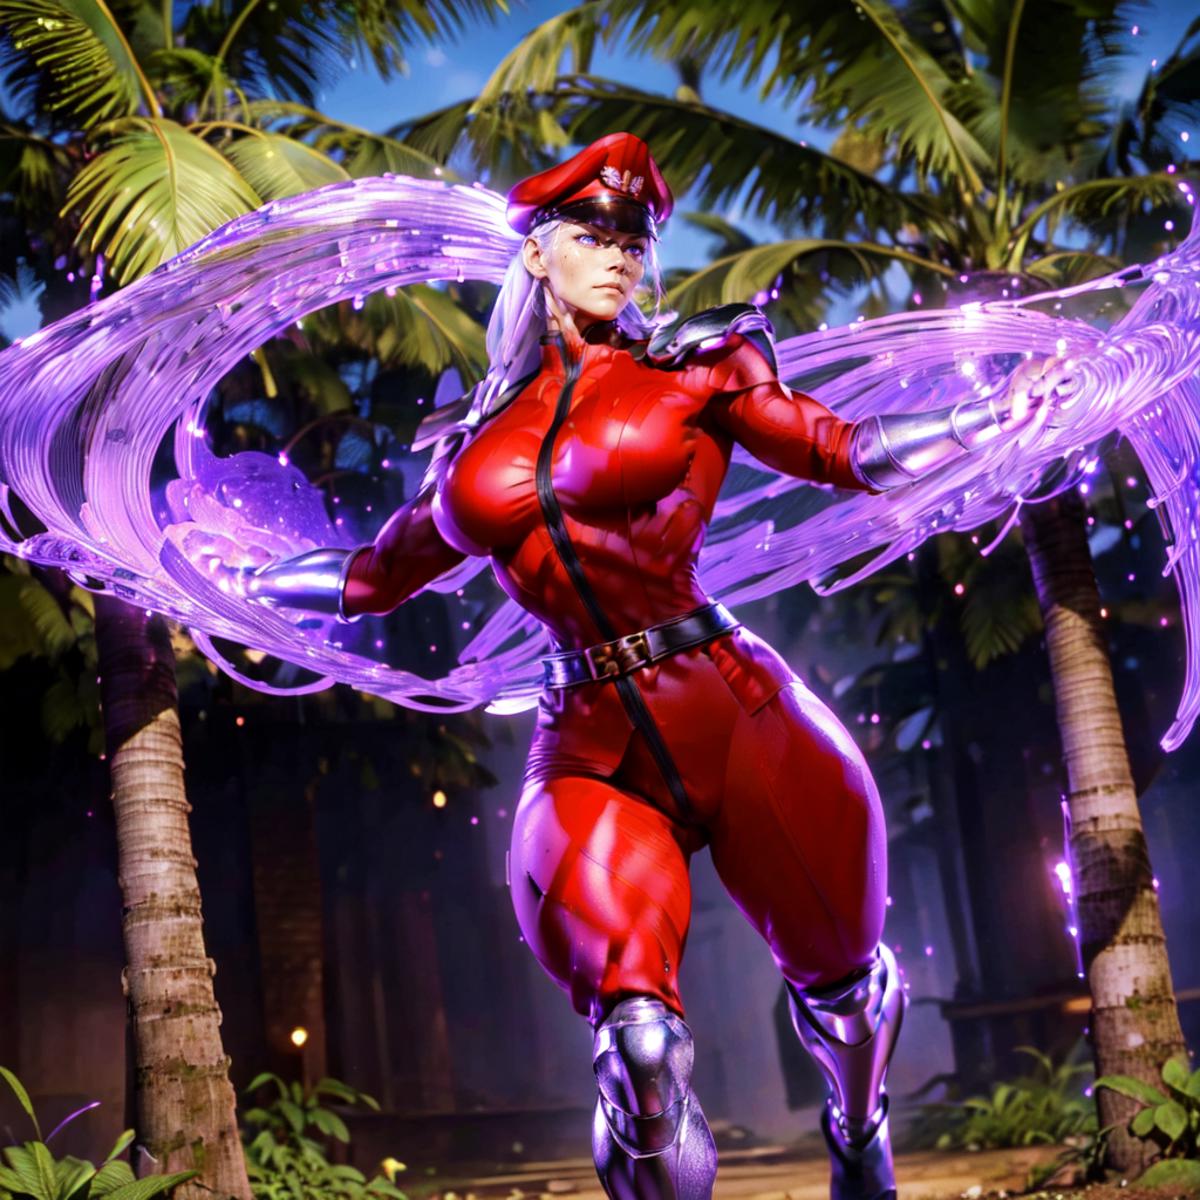 M. Bison (Female) from Street Fighter image by Bloodysunkist